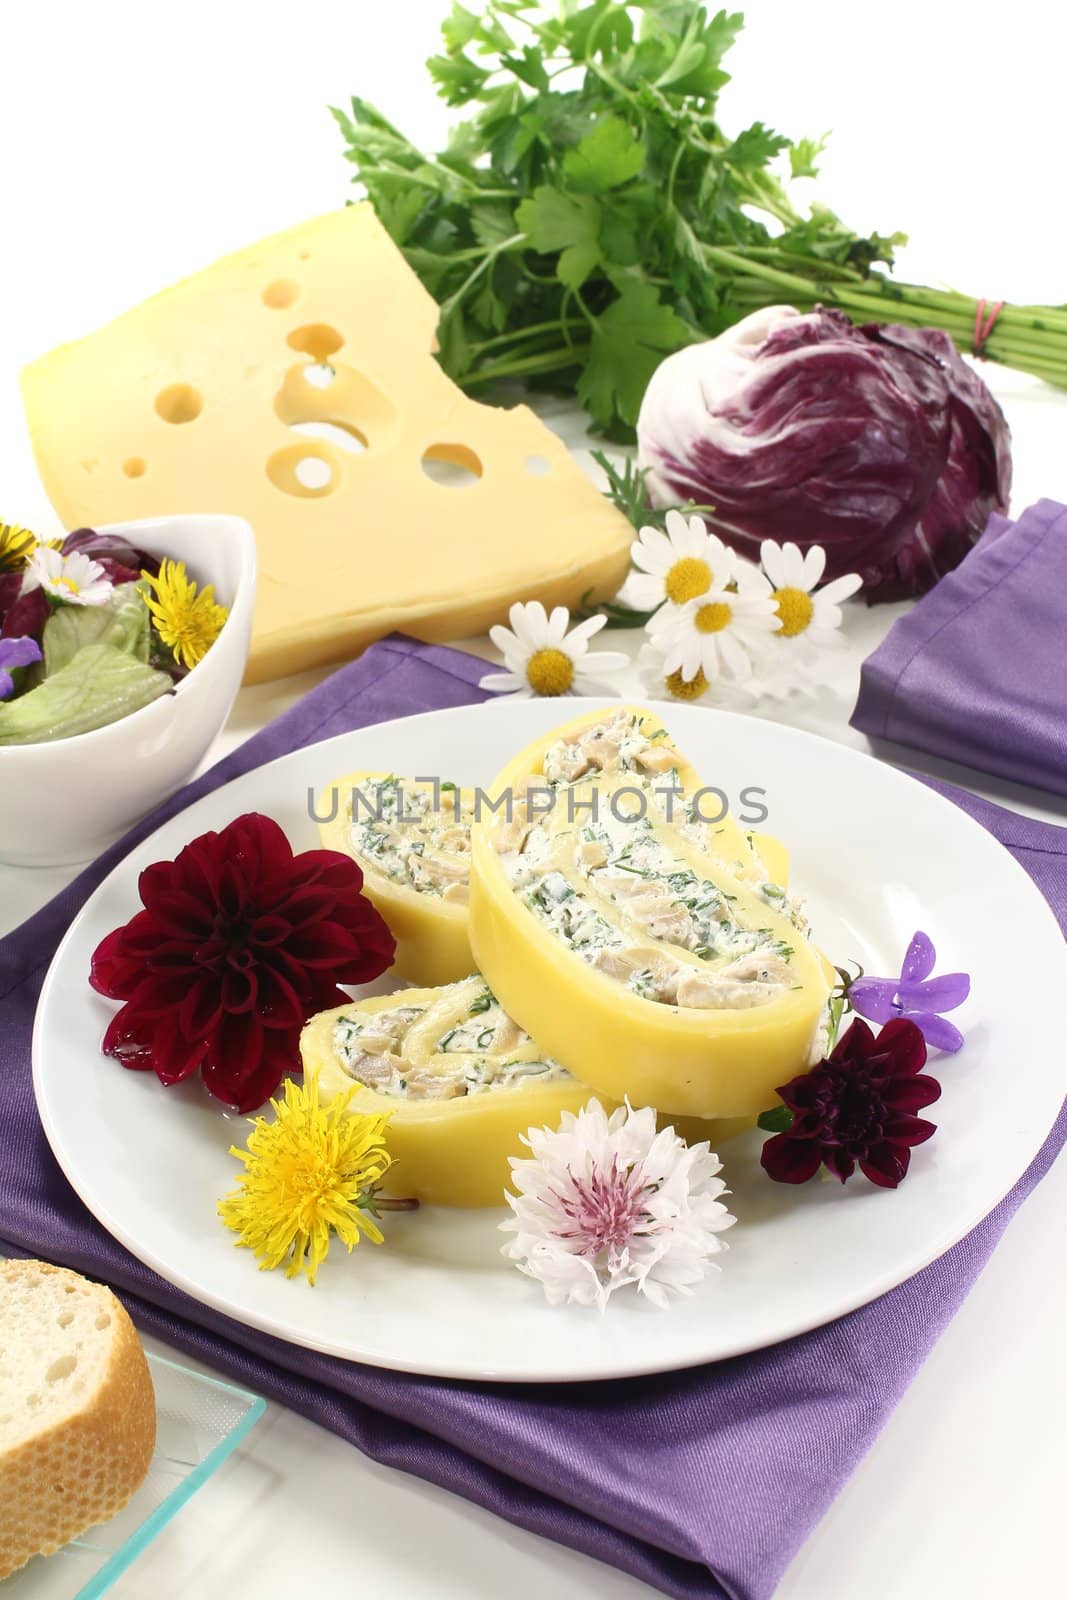 stuffed cheese rolls with cream cheese and herbs on a light background